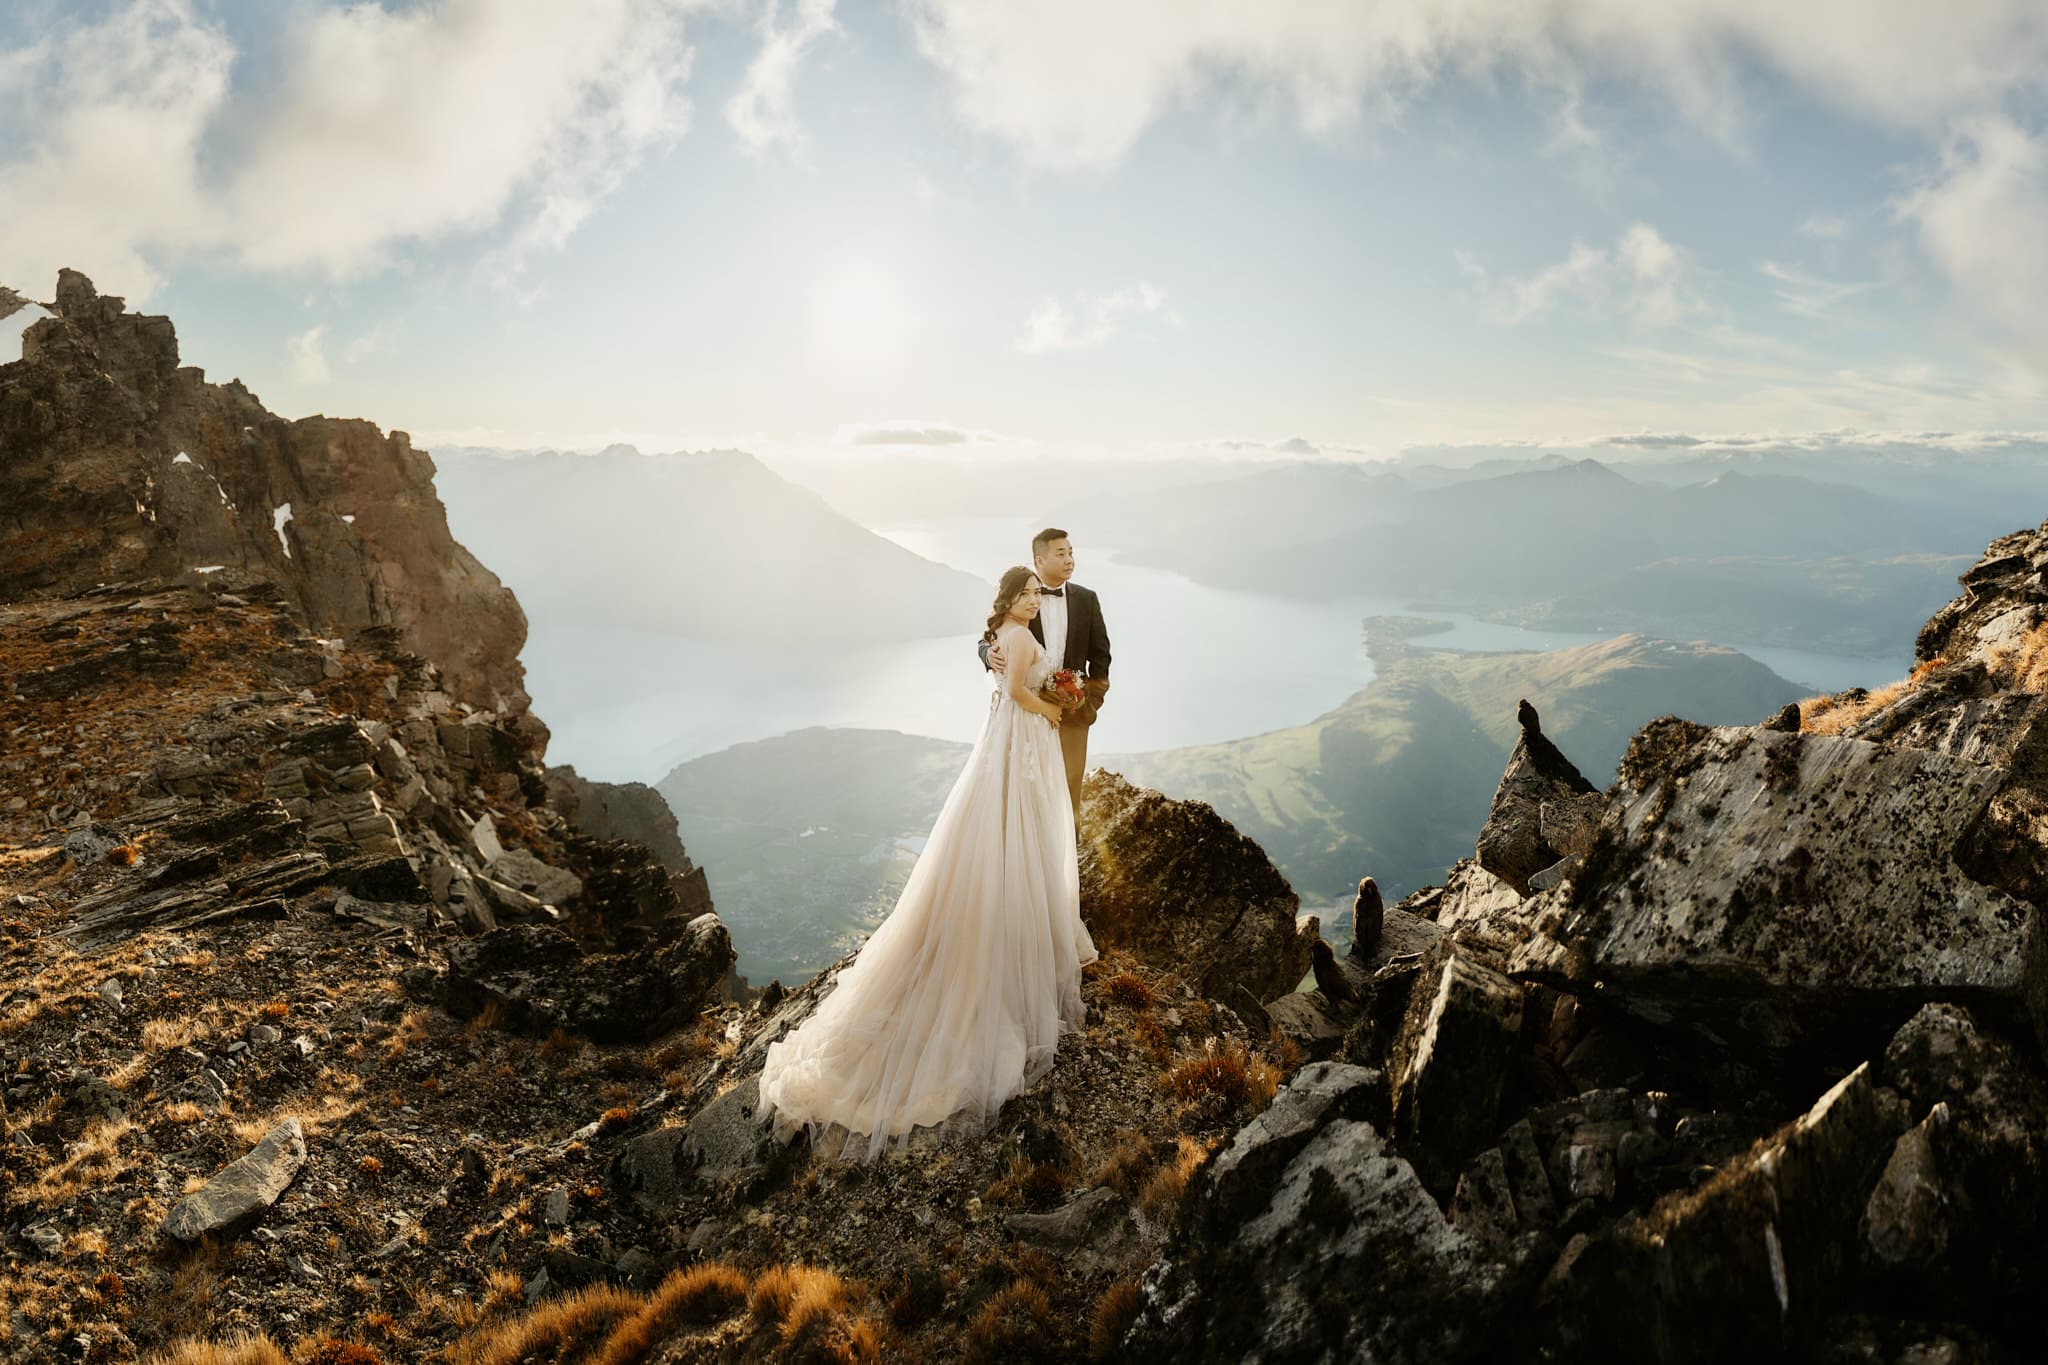 Rose & Stone's Queenstown Heli Pre-Wedding Photoshoot at Remarkables